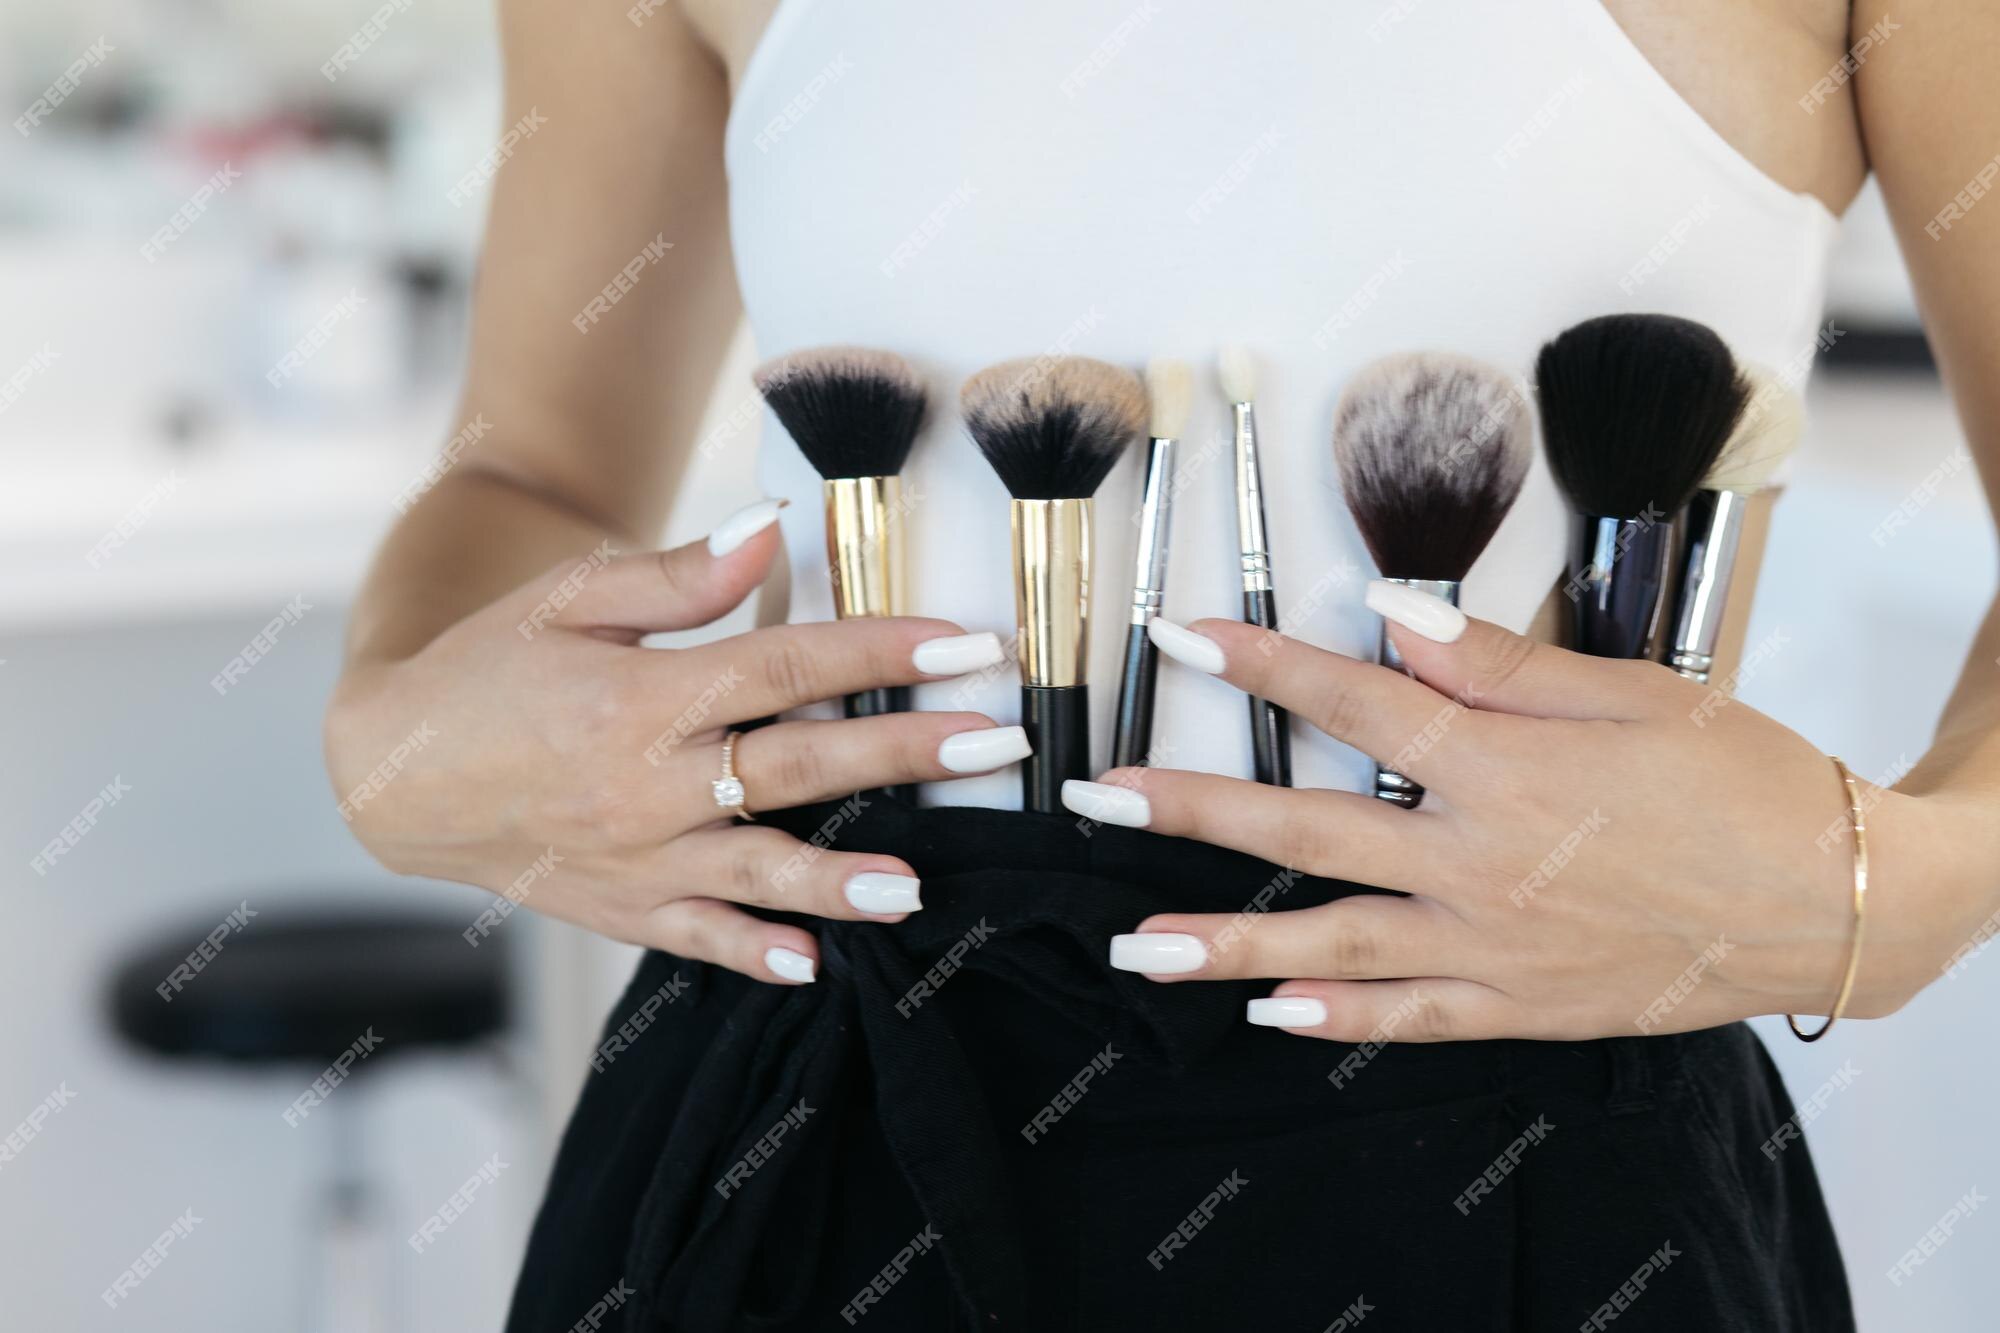 rim Blive gift vride Premium Photo | The girl is holding makeup tools professional makeup artist  with a belt bag with tassels makeup brushes professional makeup artist  doing glamour model makeup at work